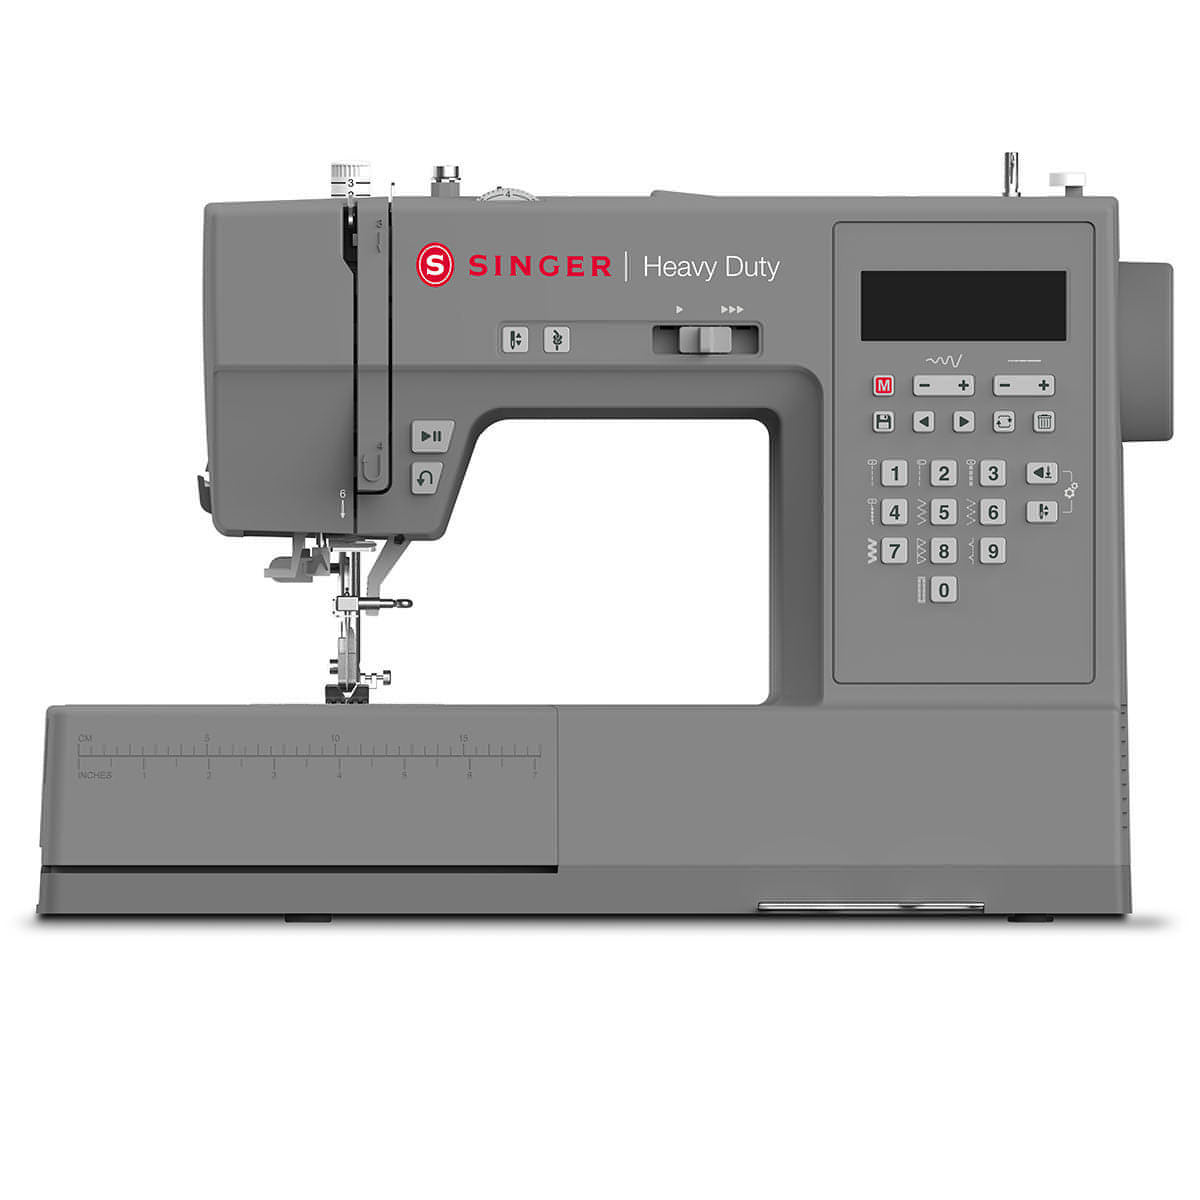 Singer Heavy Duty HD6705 Sewing Machine - 60% stronger and 30% faster - 400 stitch applications with letter and number sewing